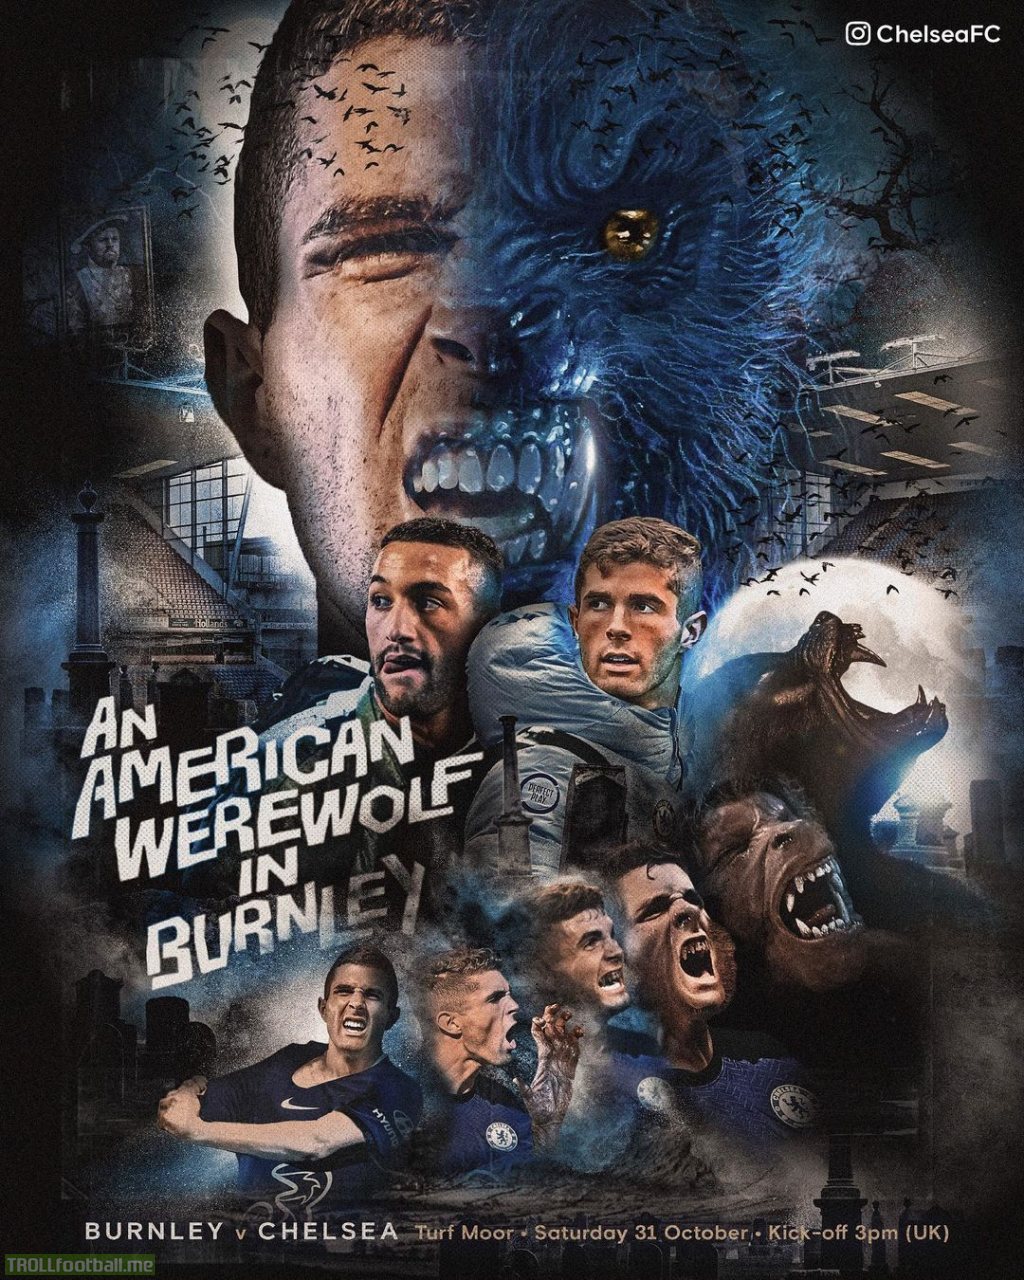 Chelsea portray Sean Dyche as Henry VIII in their match poster for their clash against Burnley